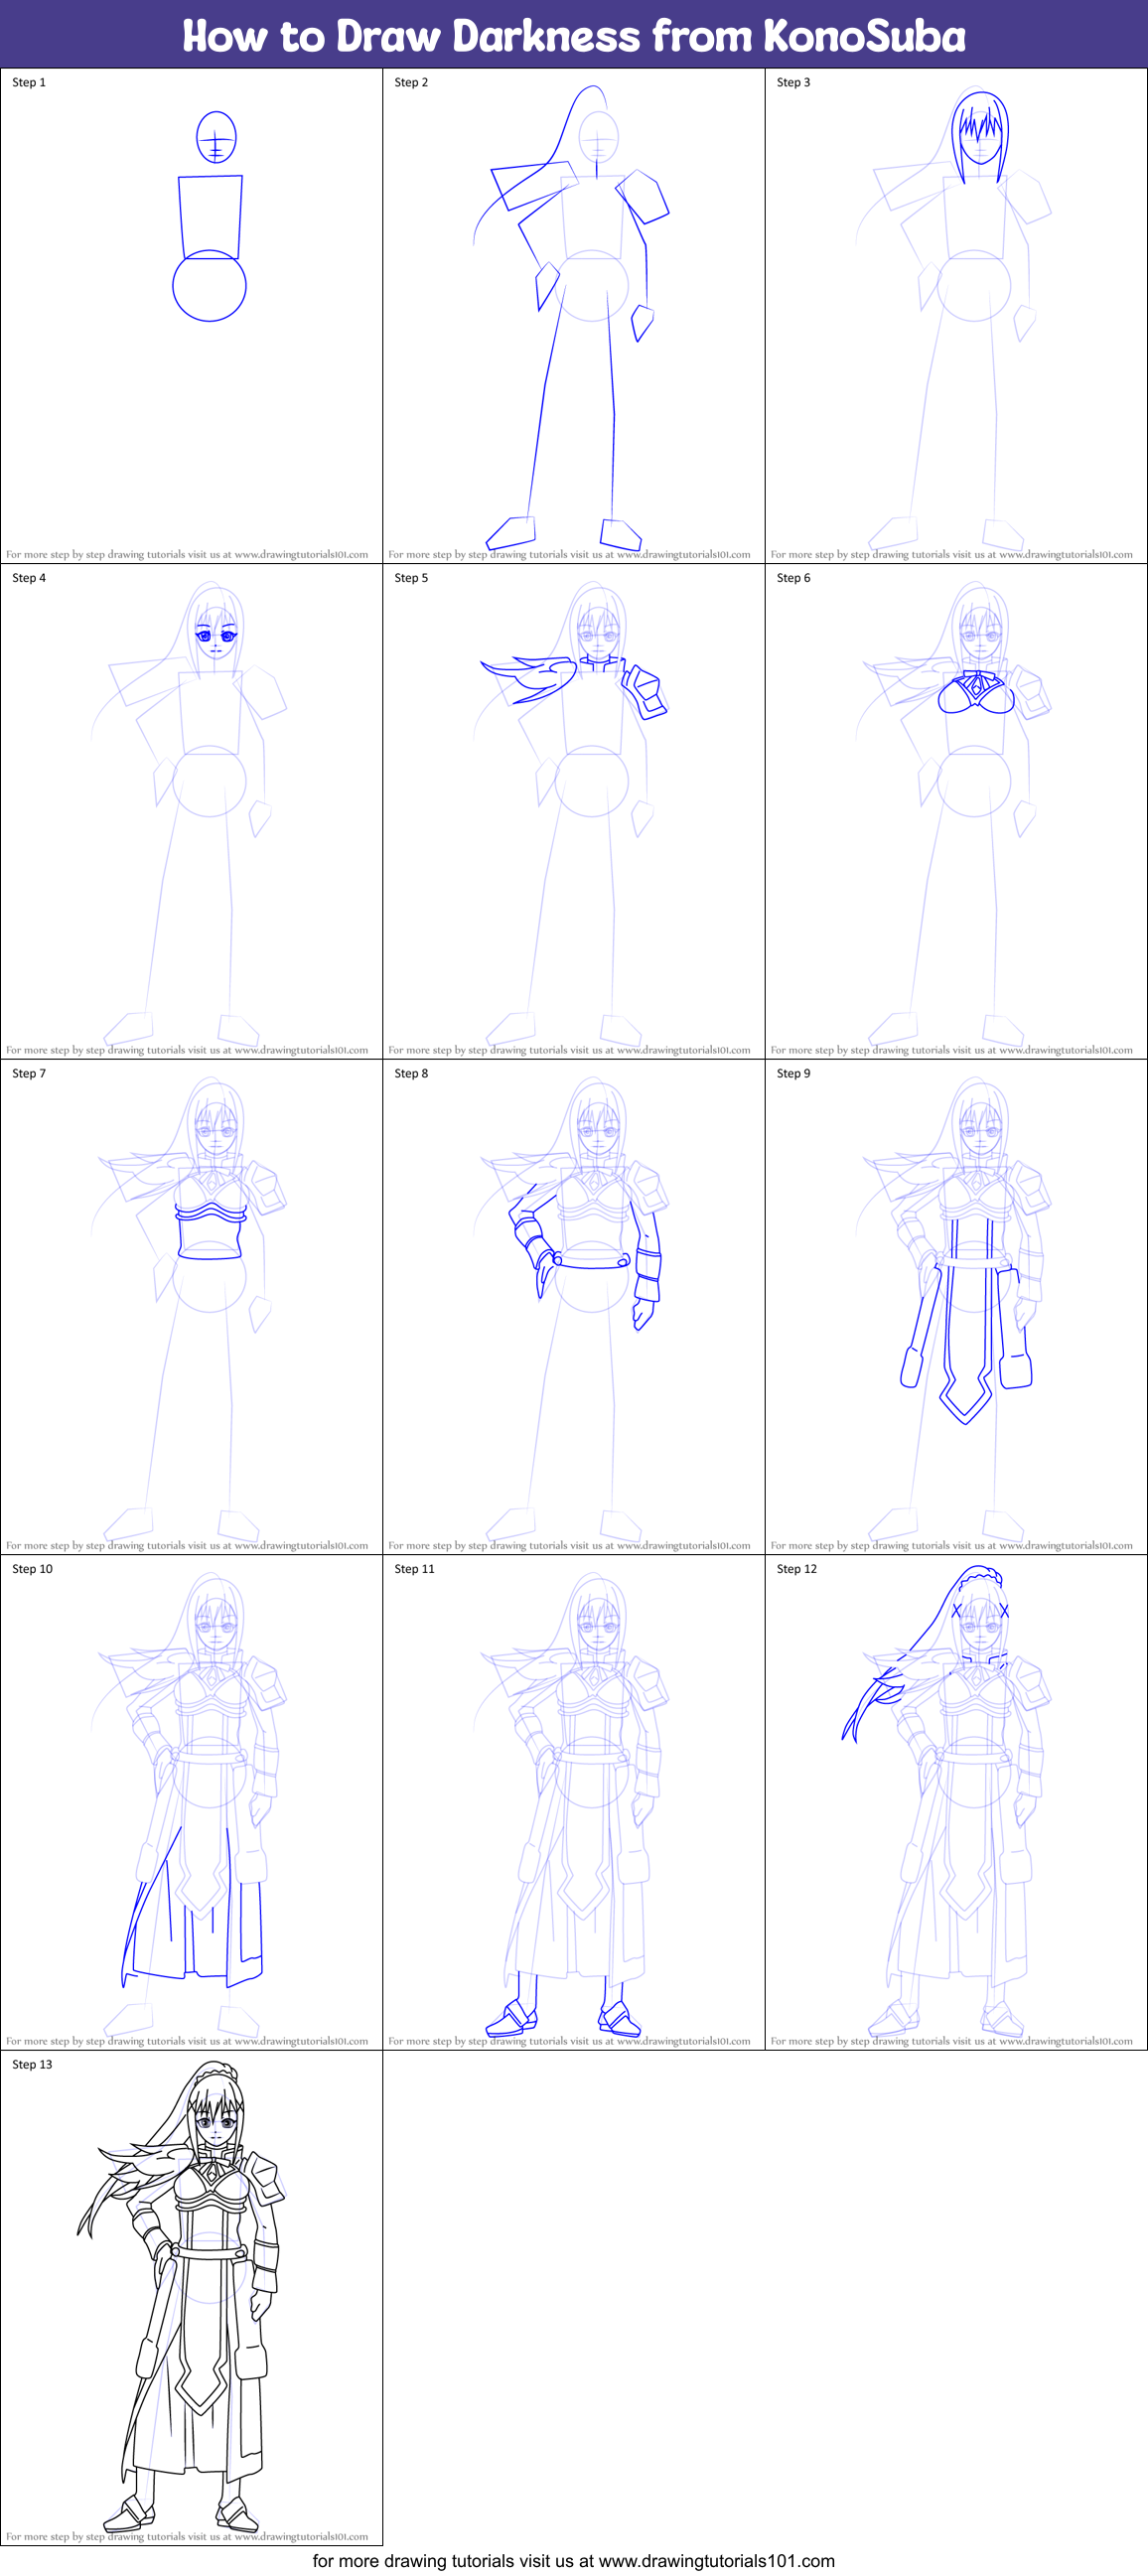 How to Draw Darkness from KonoSuba printable step by step drawing sheet